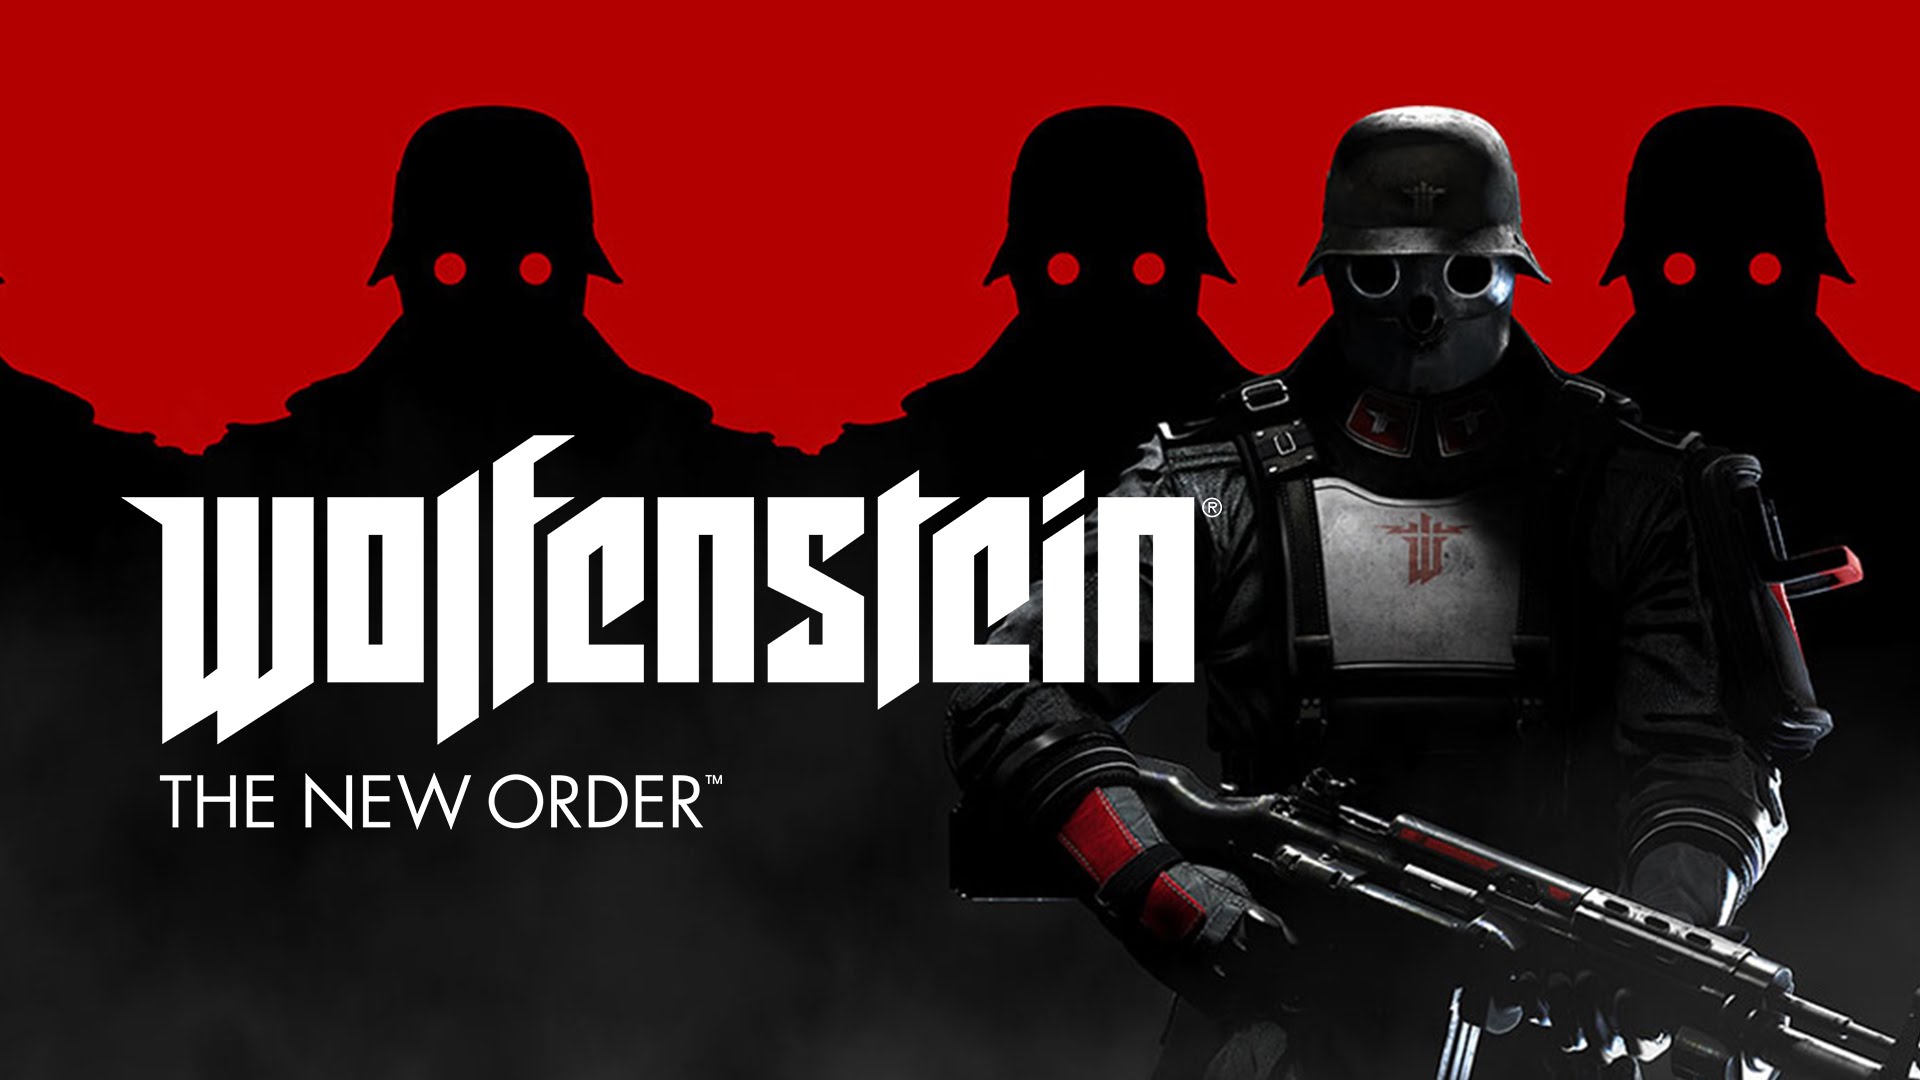 wolfenstein the new order wallpaper,soldier,font,fictional character,games,swat